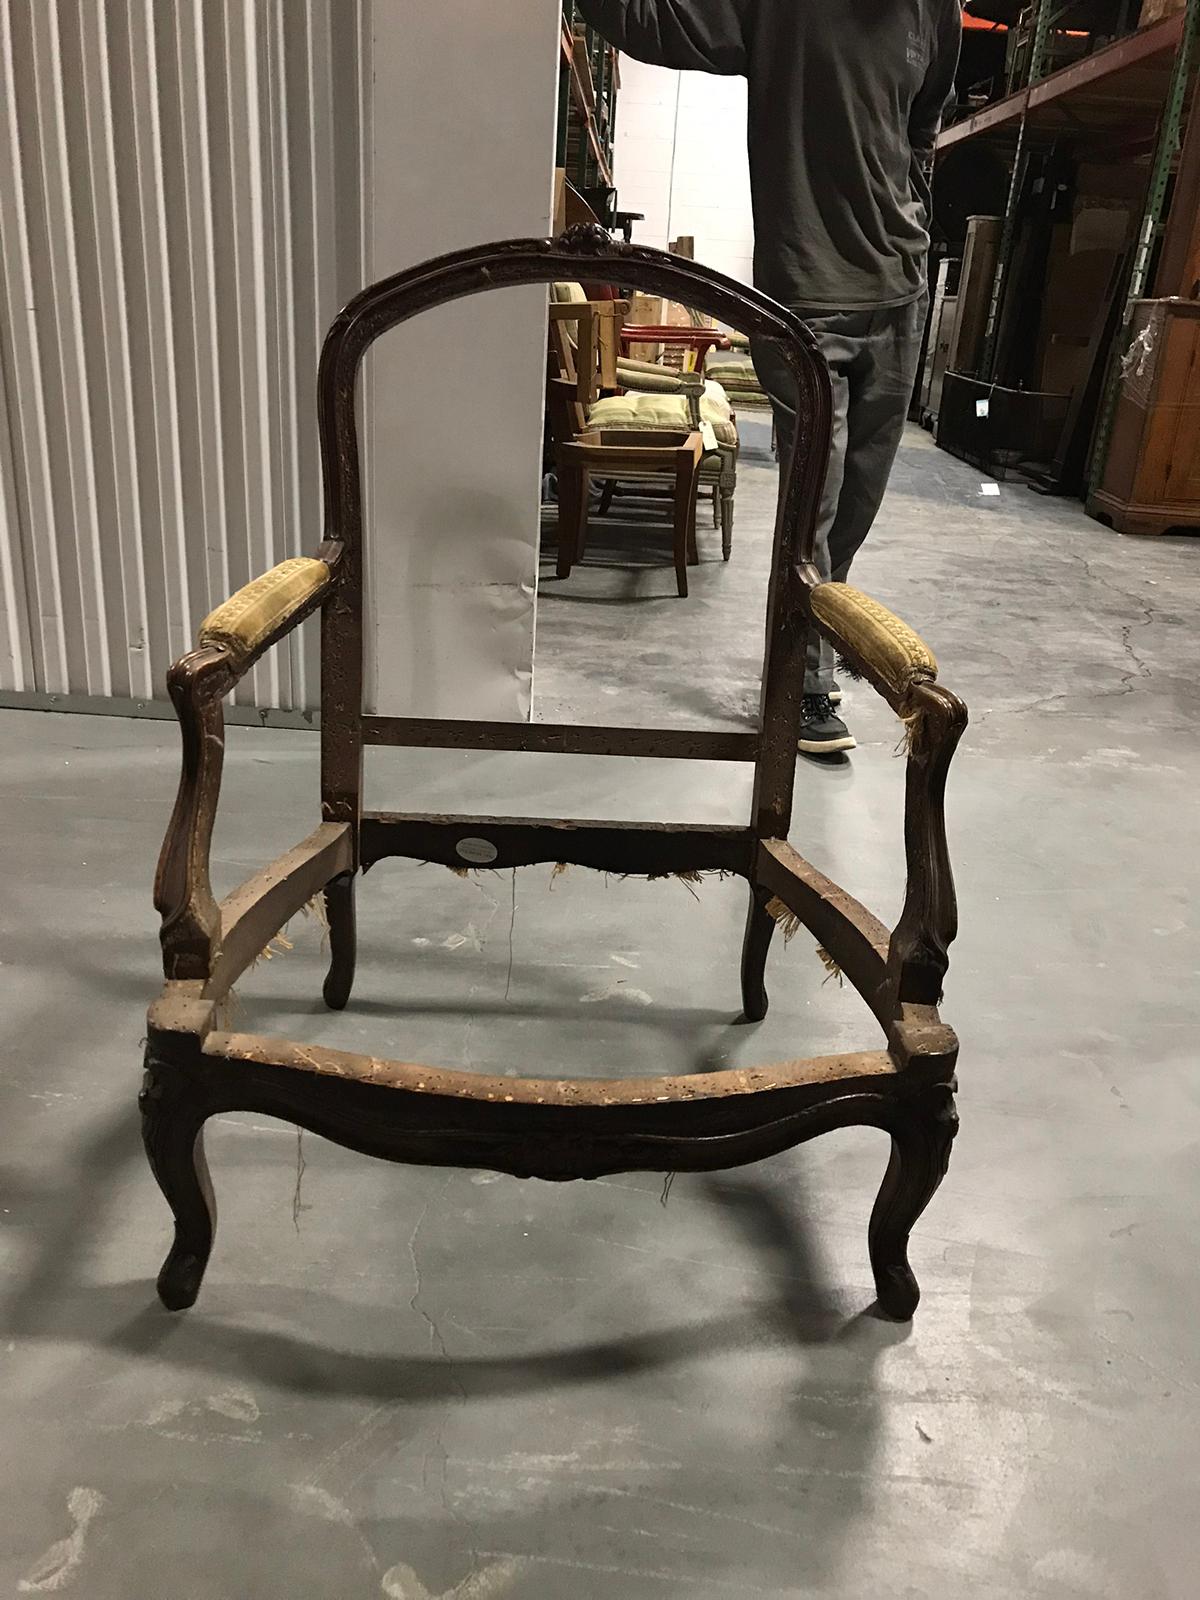 19th century Louis XV style bergère chair frame
Measures: 28